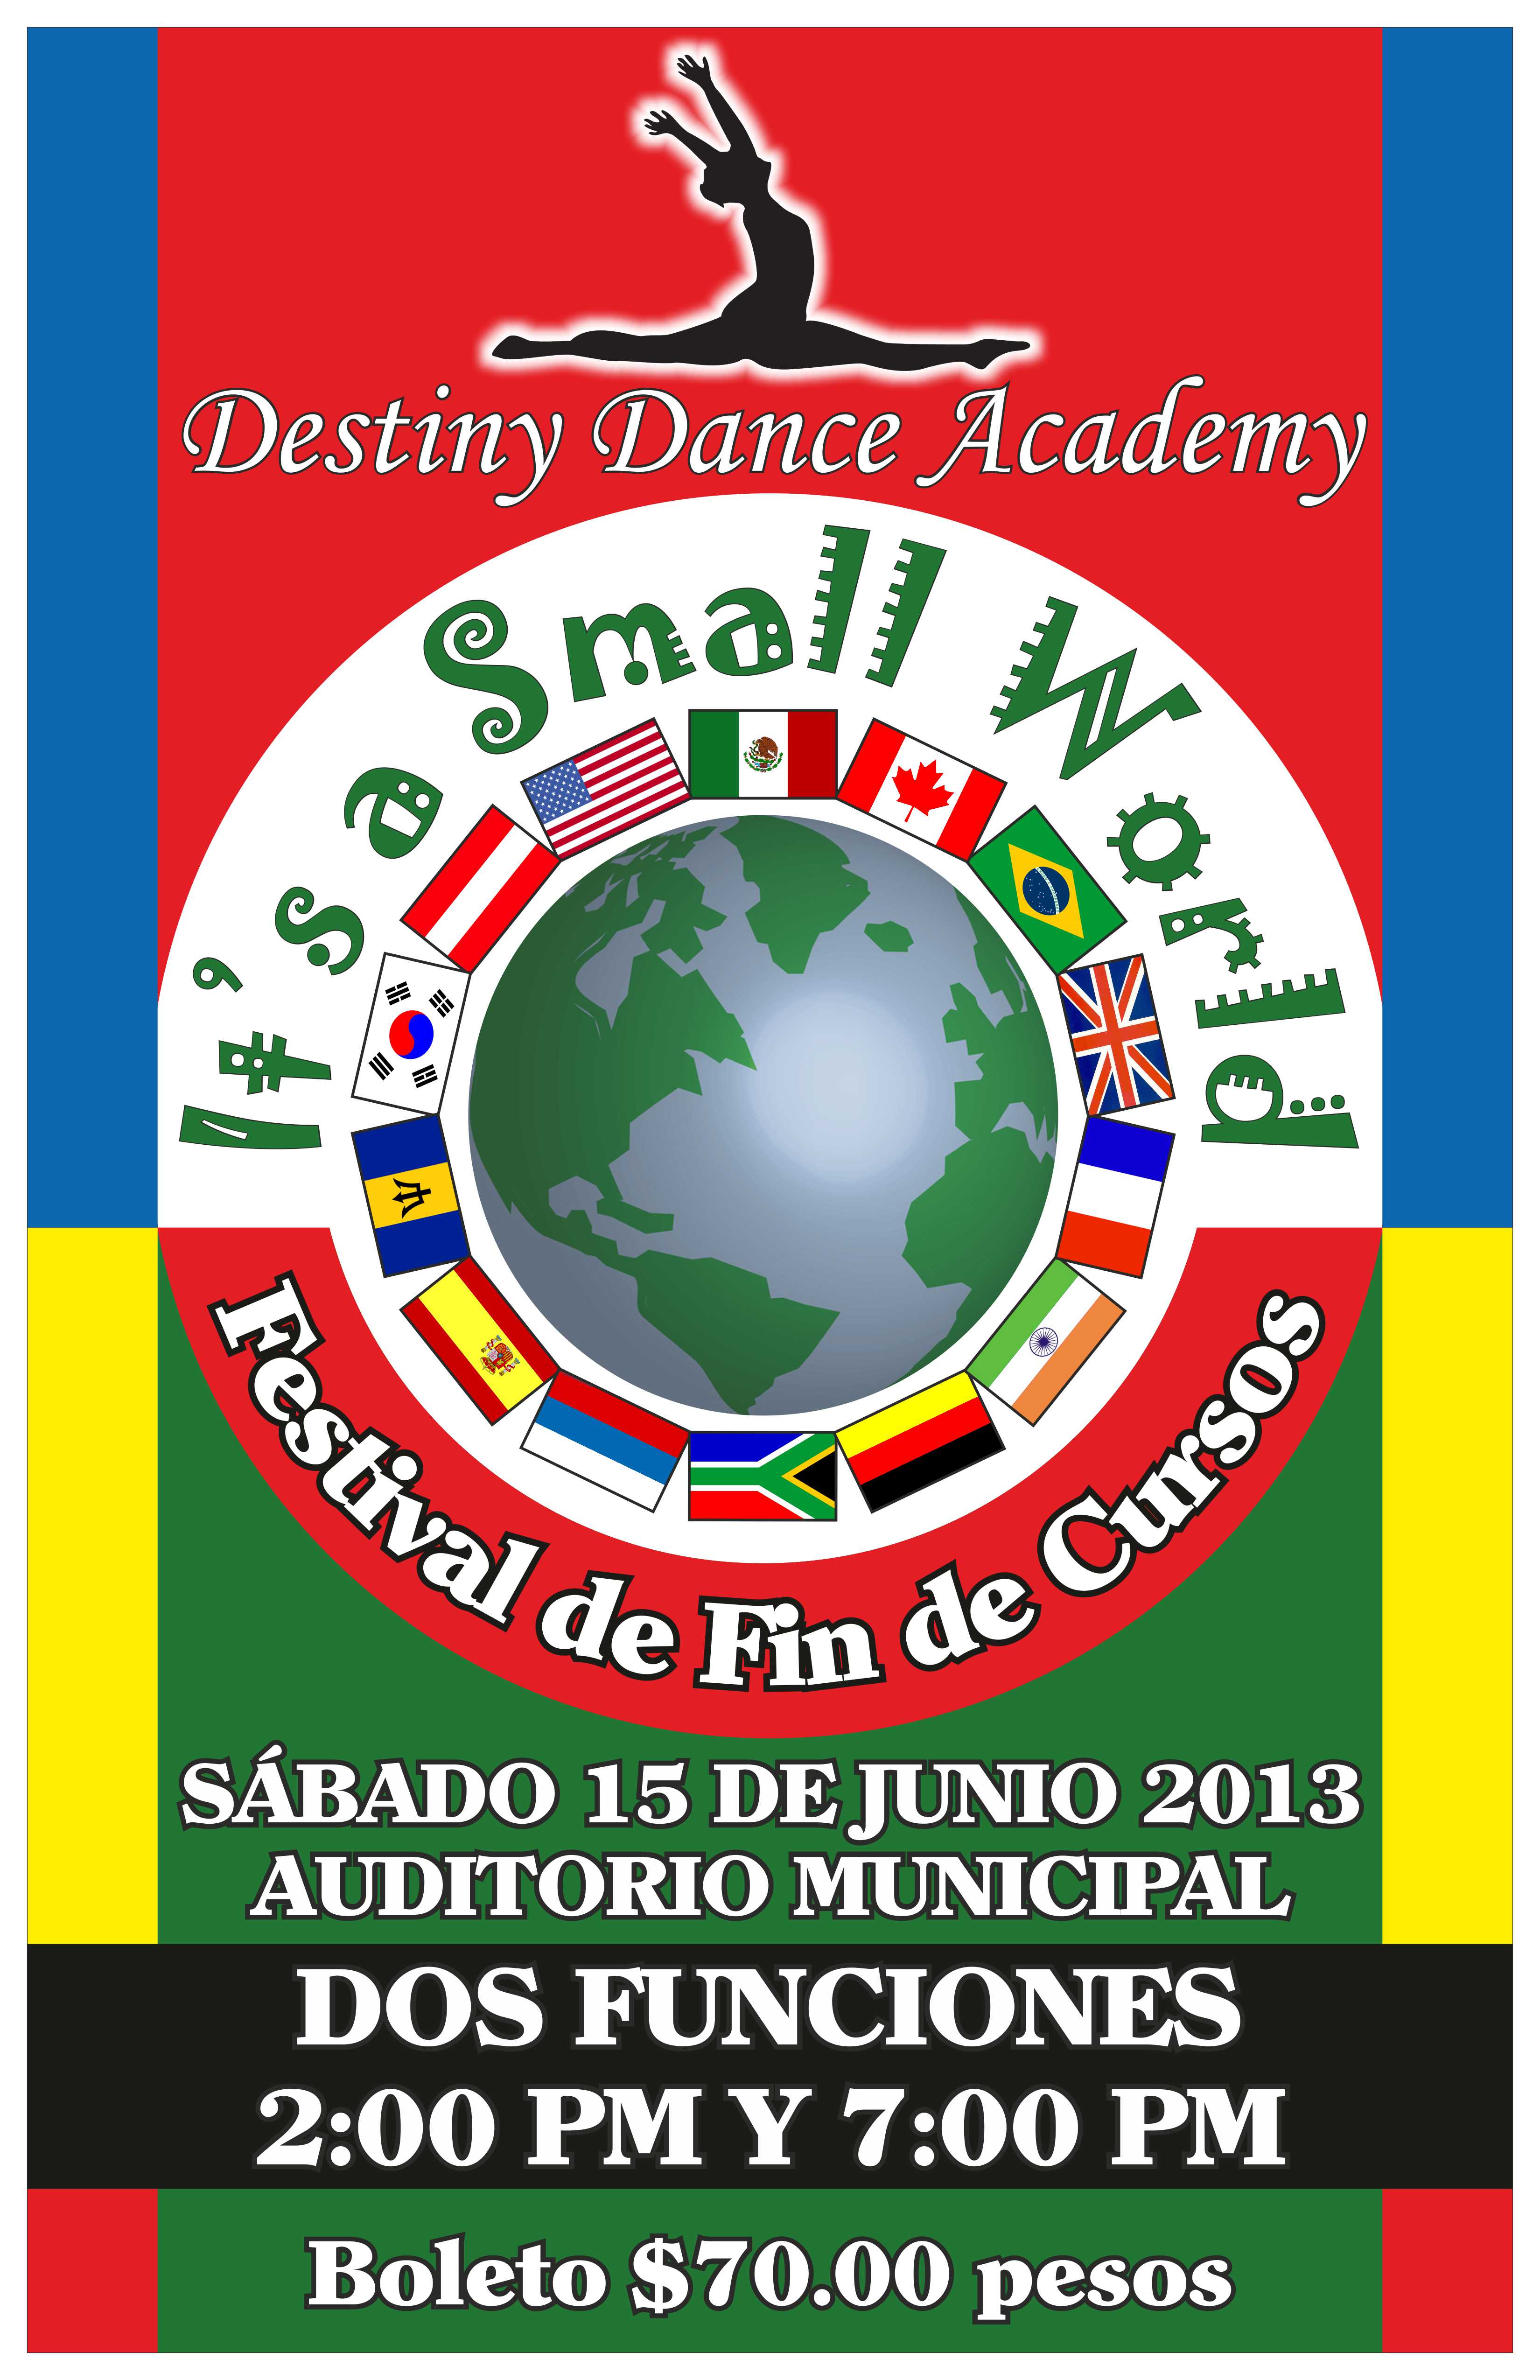 POSTER-ITS-A-SMALL-WORLD-1 Destiny Dance Academy presents "It's a Small World" June 15